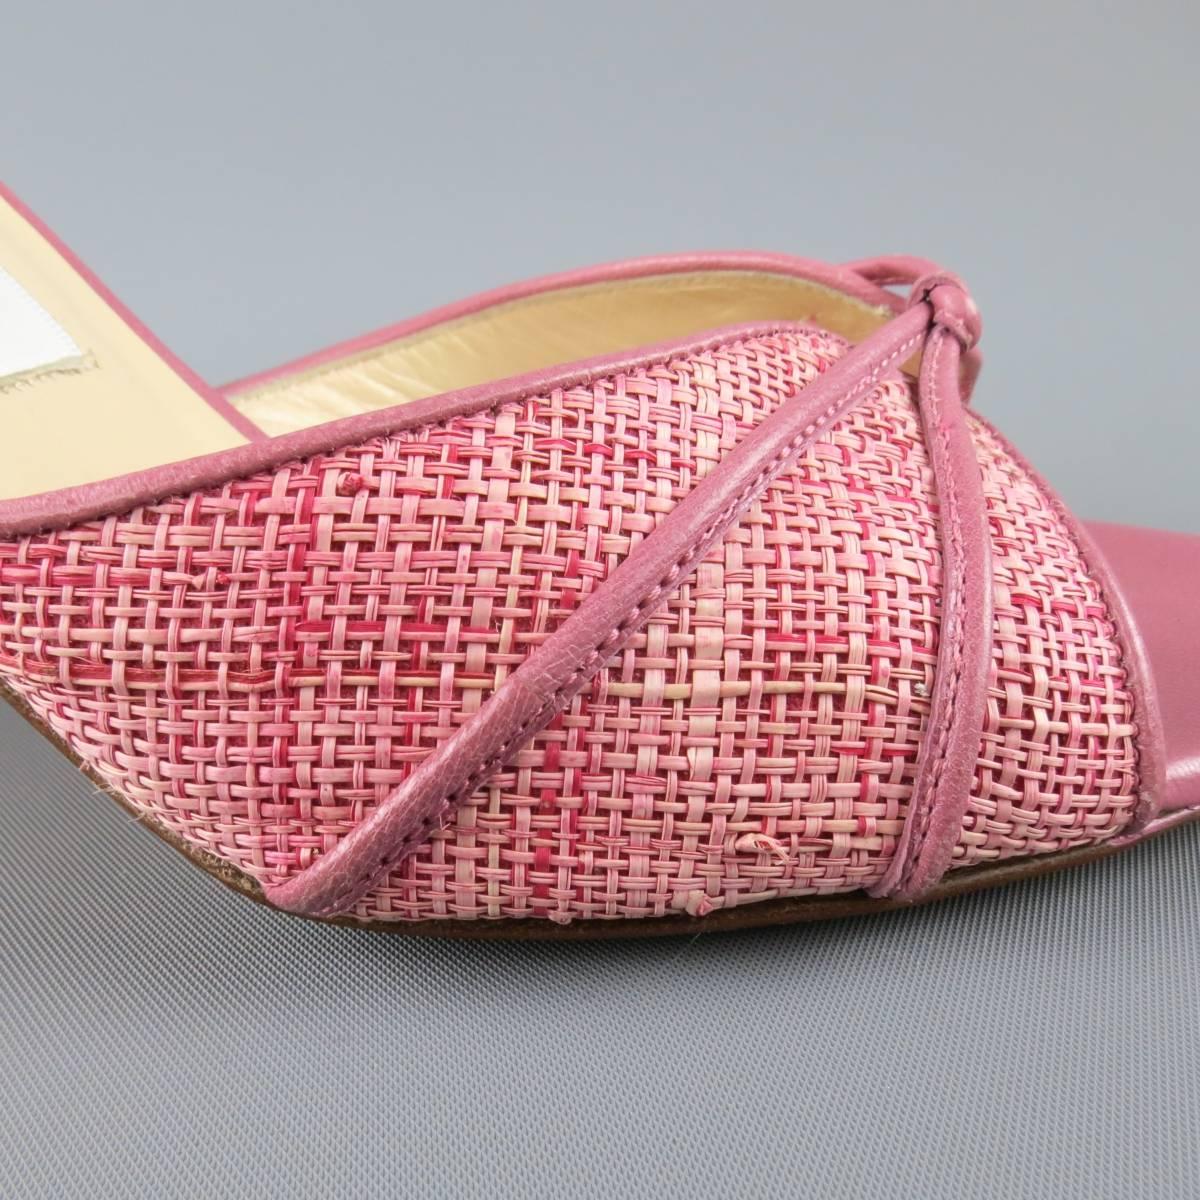 JIMMY CHOO summer mules in muted pink leather featuring a woven raffia strap with piping and covered kitten heel. Made in Italy.
 
Good Pre-Owned Condition.
Marked: IT 37.5
 
Heel: 3.5 in.


Web ID: 80865 